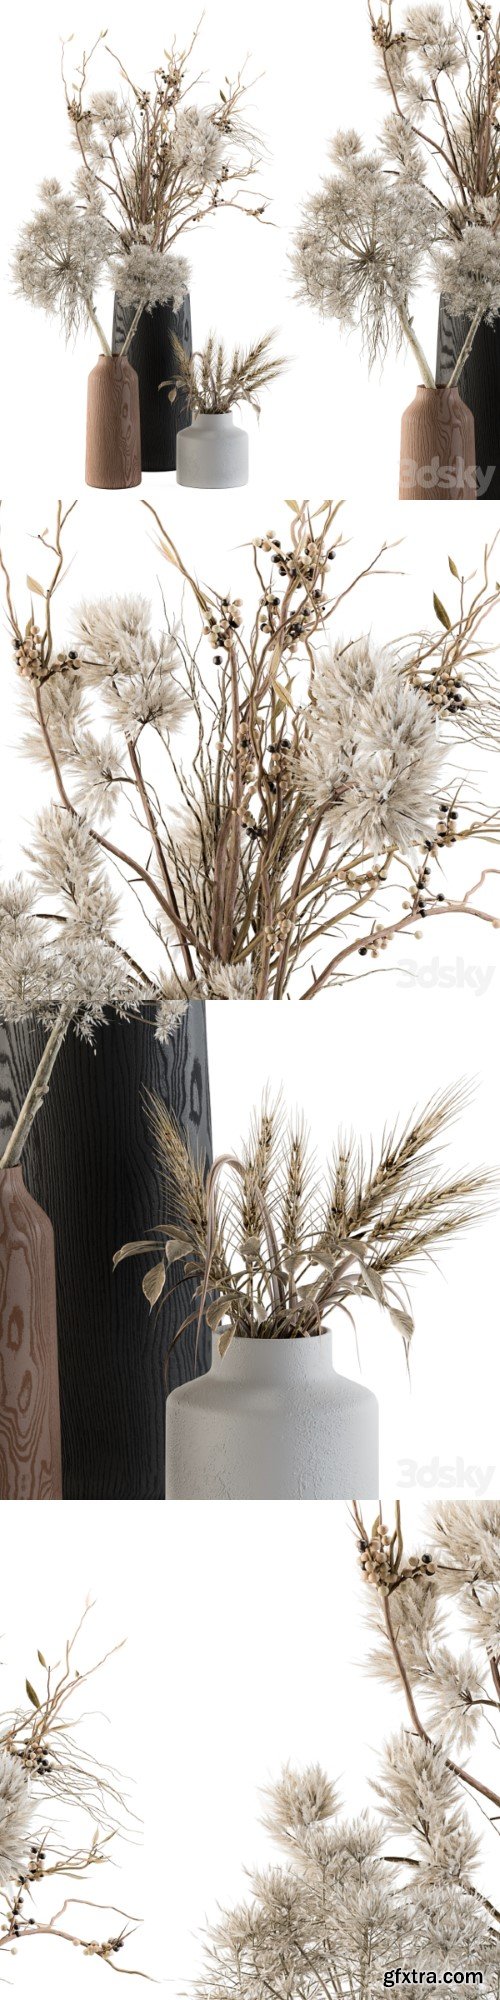 Dry plants 33 - Pampas and Dried Branch